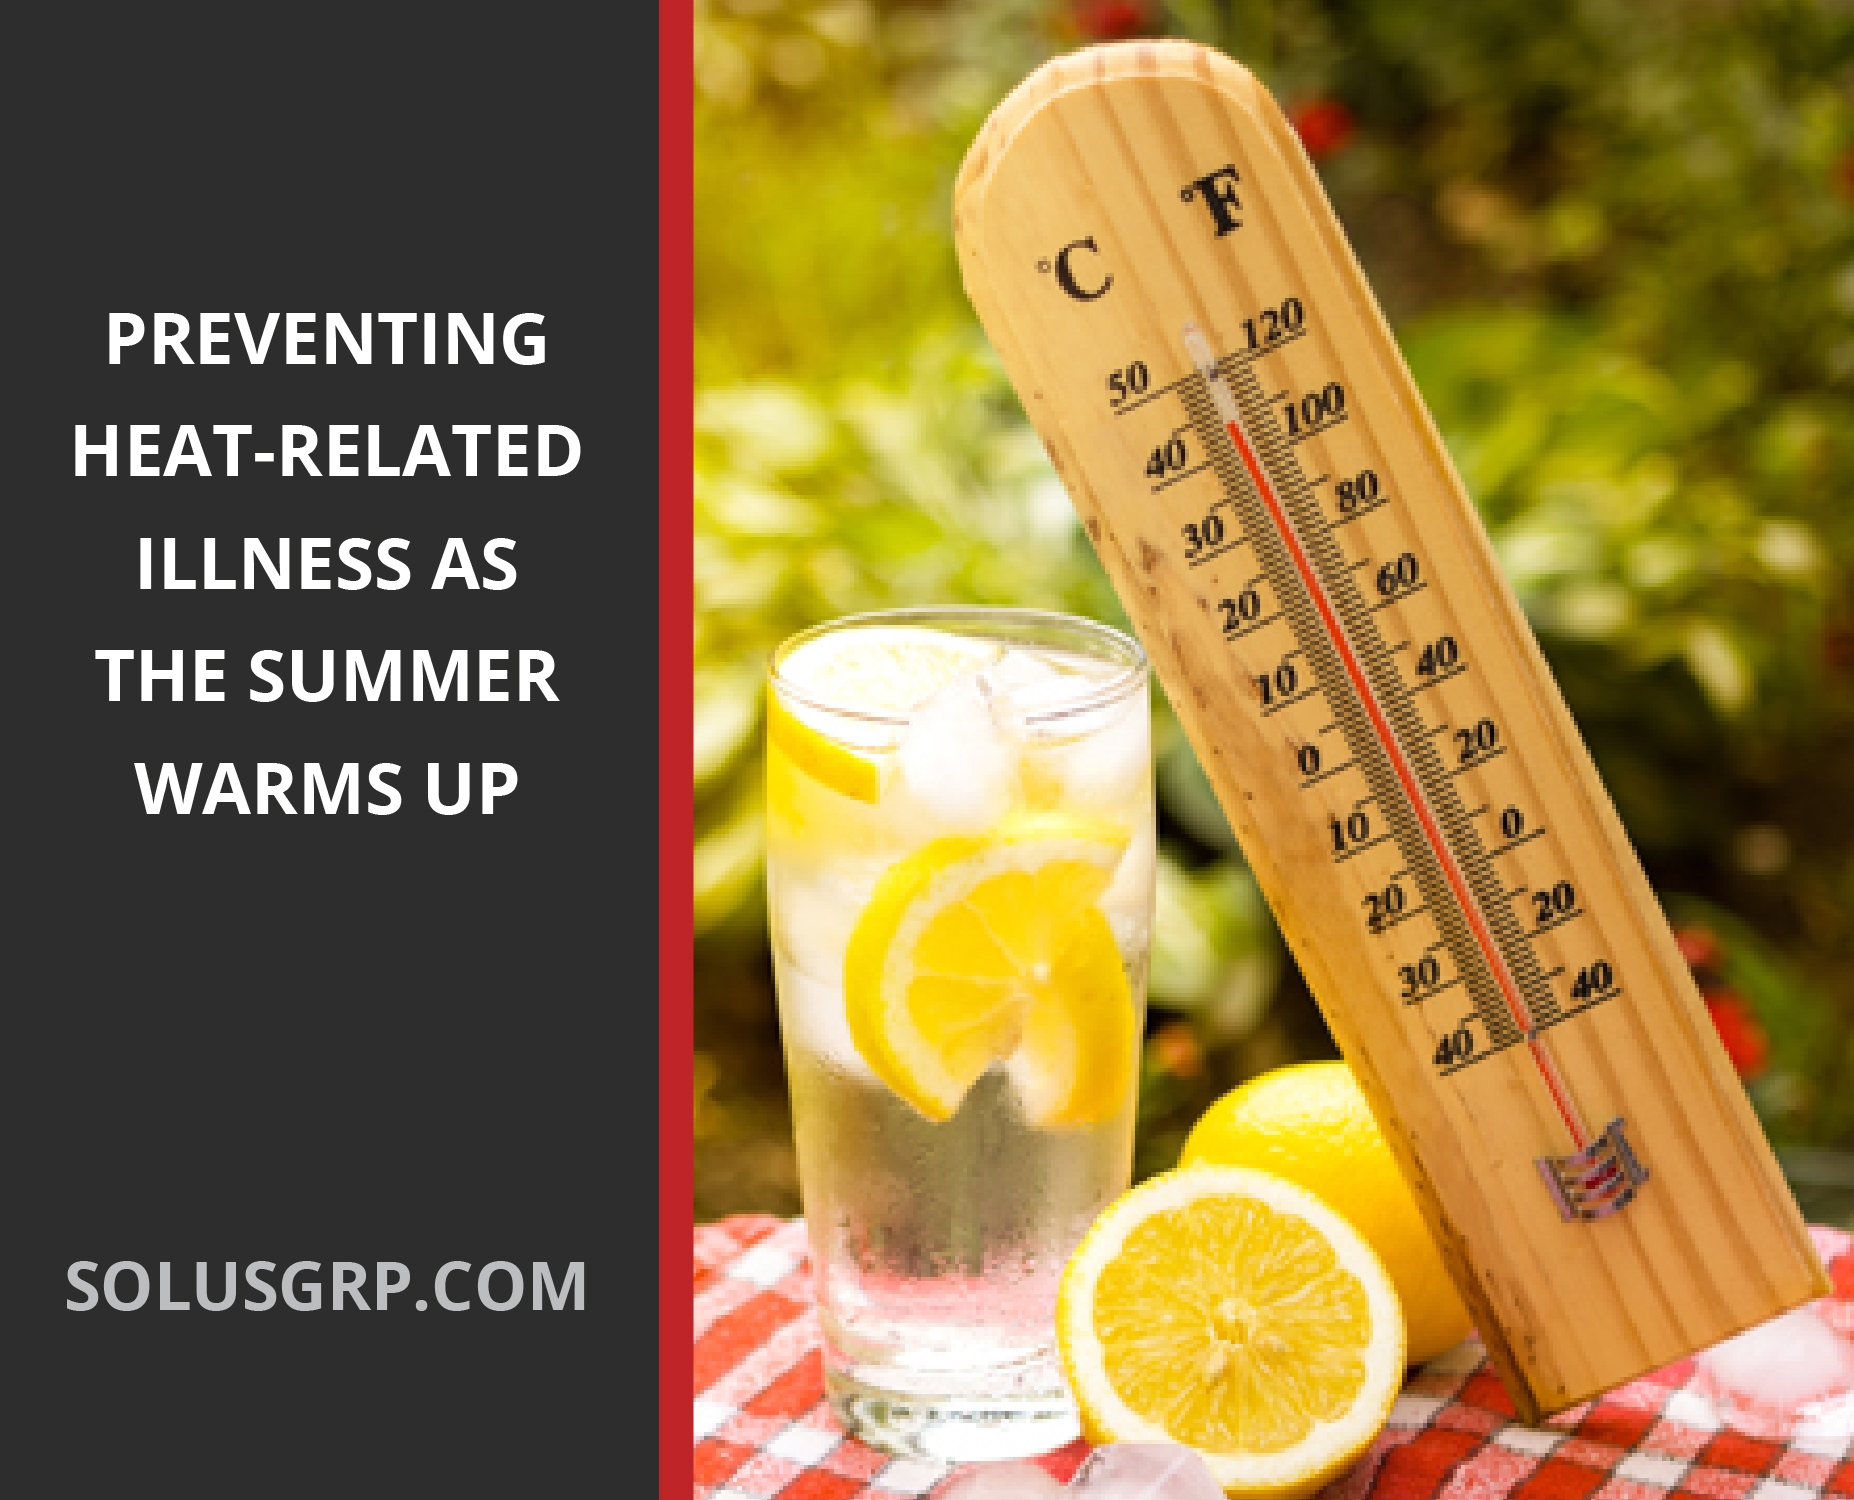 Drinking plenty of fluids is one way to help protect from heat-related illness.